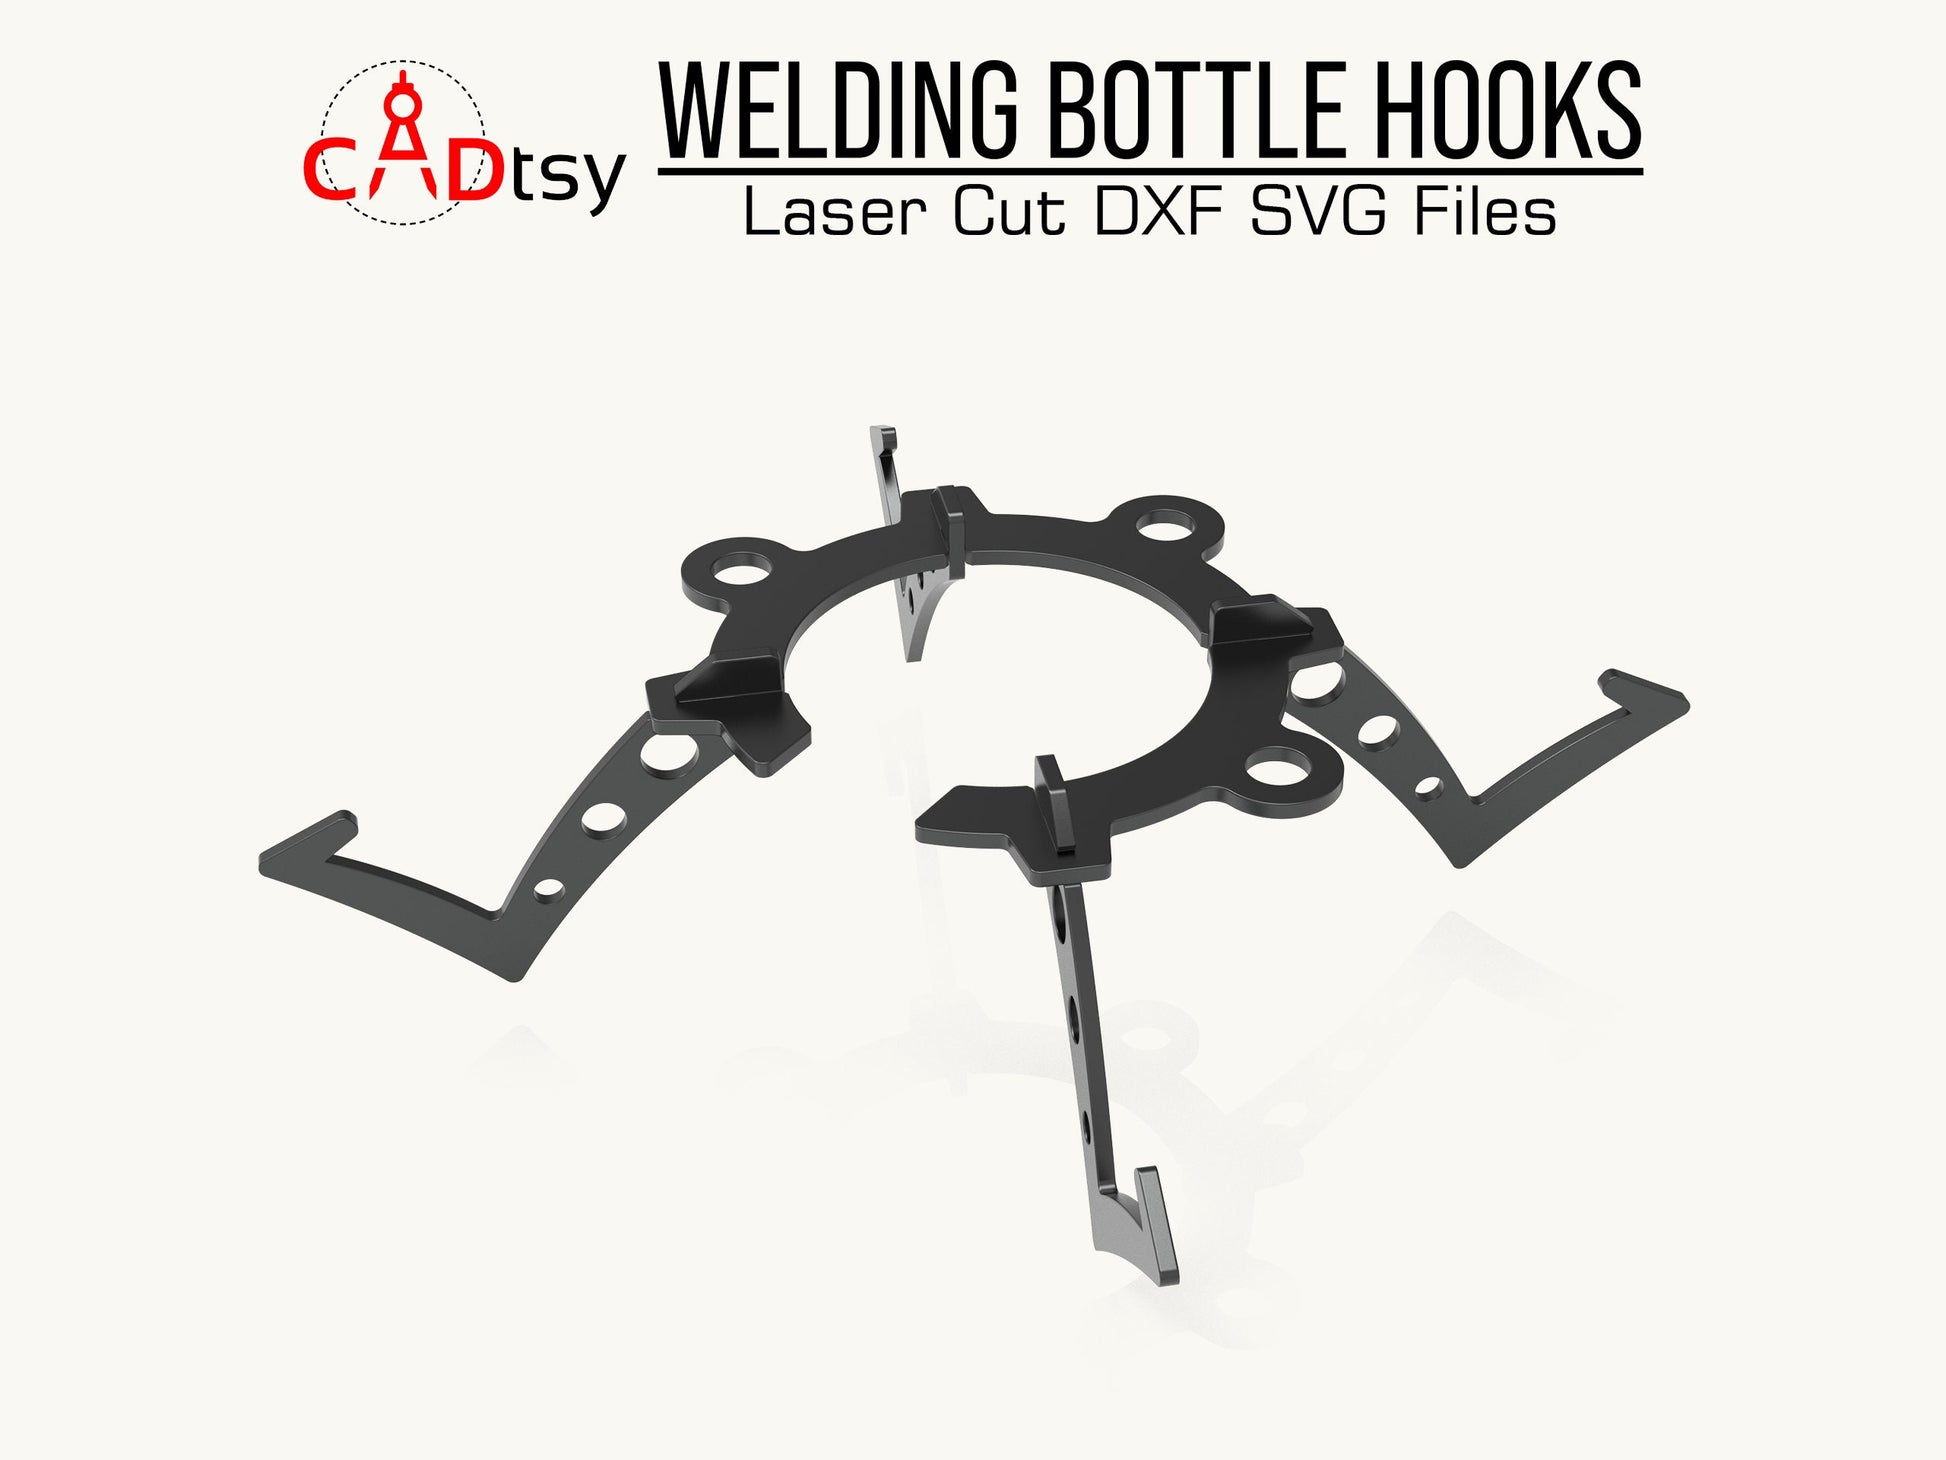 Precision-engineered welding bottle tank hooks designed for CNC plasma or laser cutting, provided in a DXF file, ensuring secure and convenient storage solutions for welding setups.